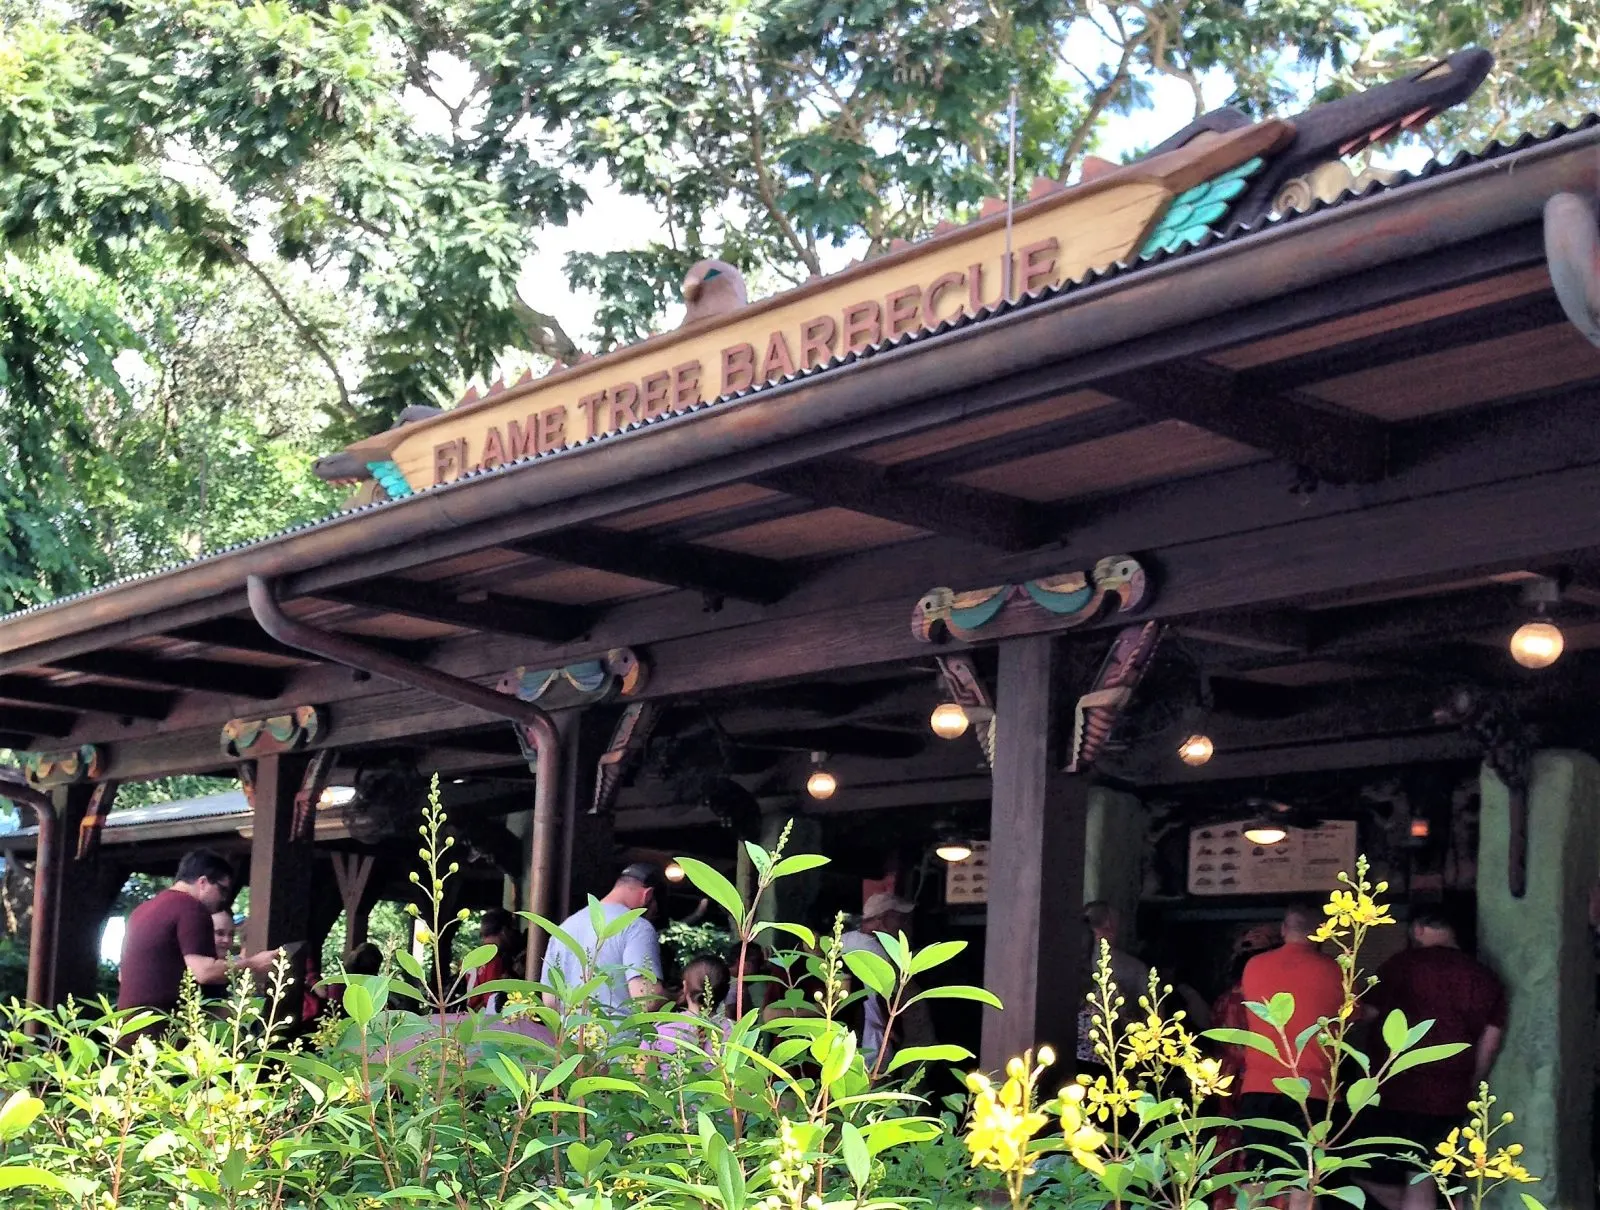 flame tree barbecue sign and exterior